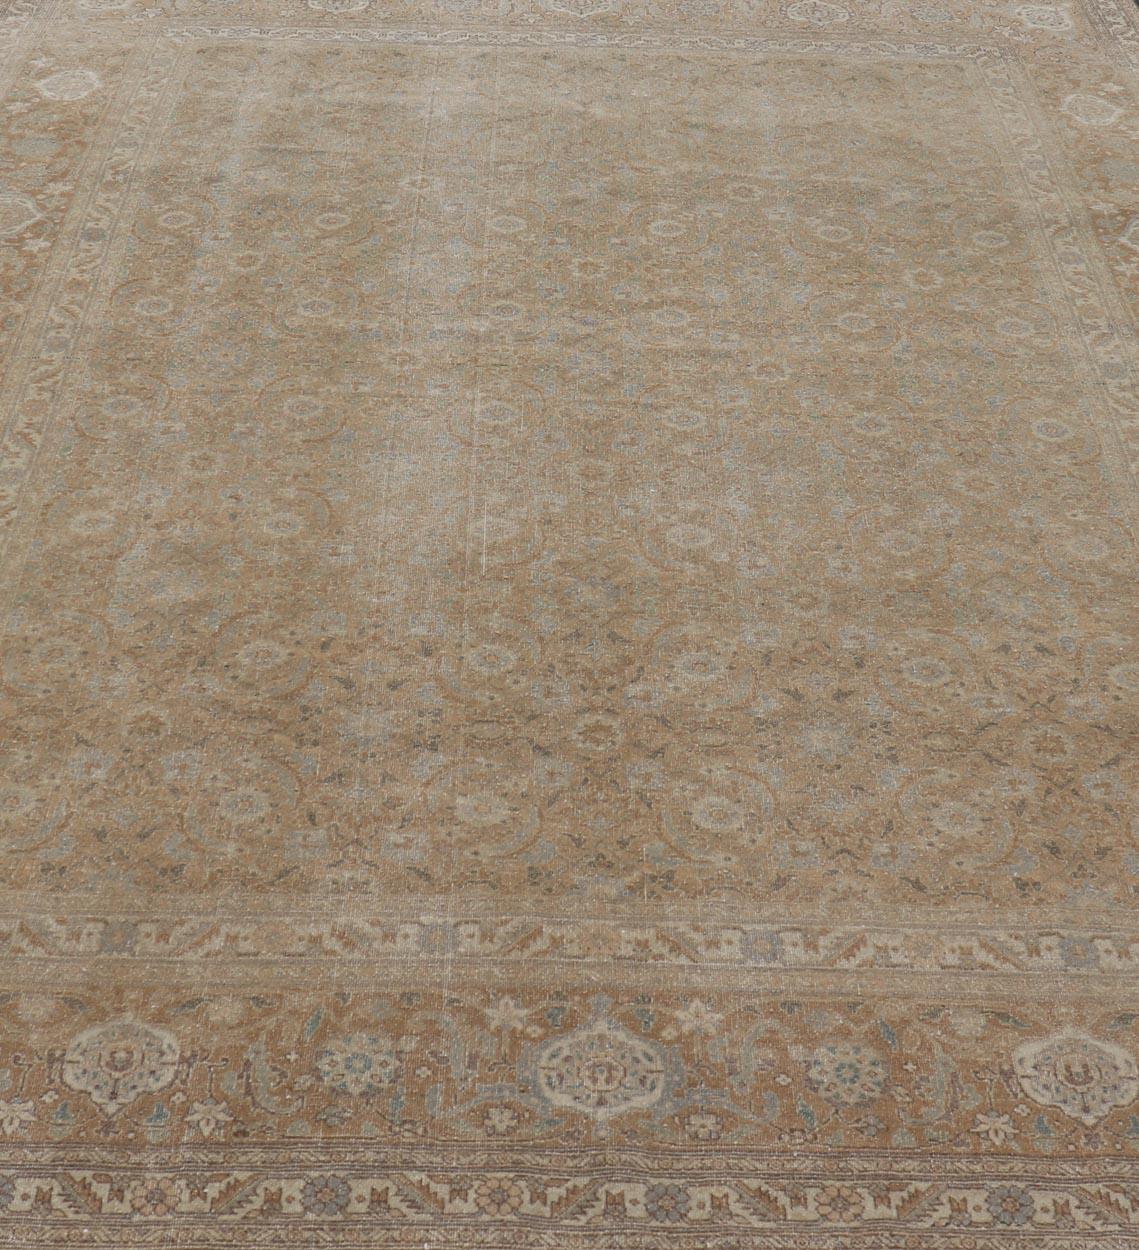 Antique Persian Tabriz Rug in Wool with All-Over Floral Design in Earth Colors For Sale 5